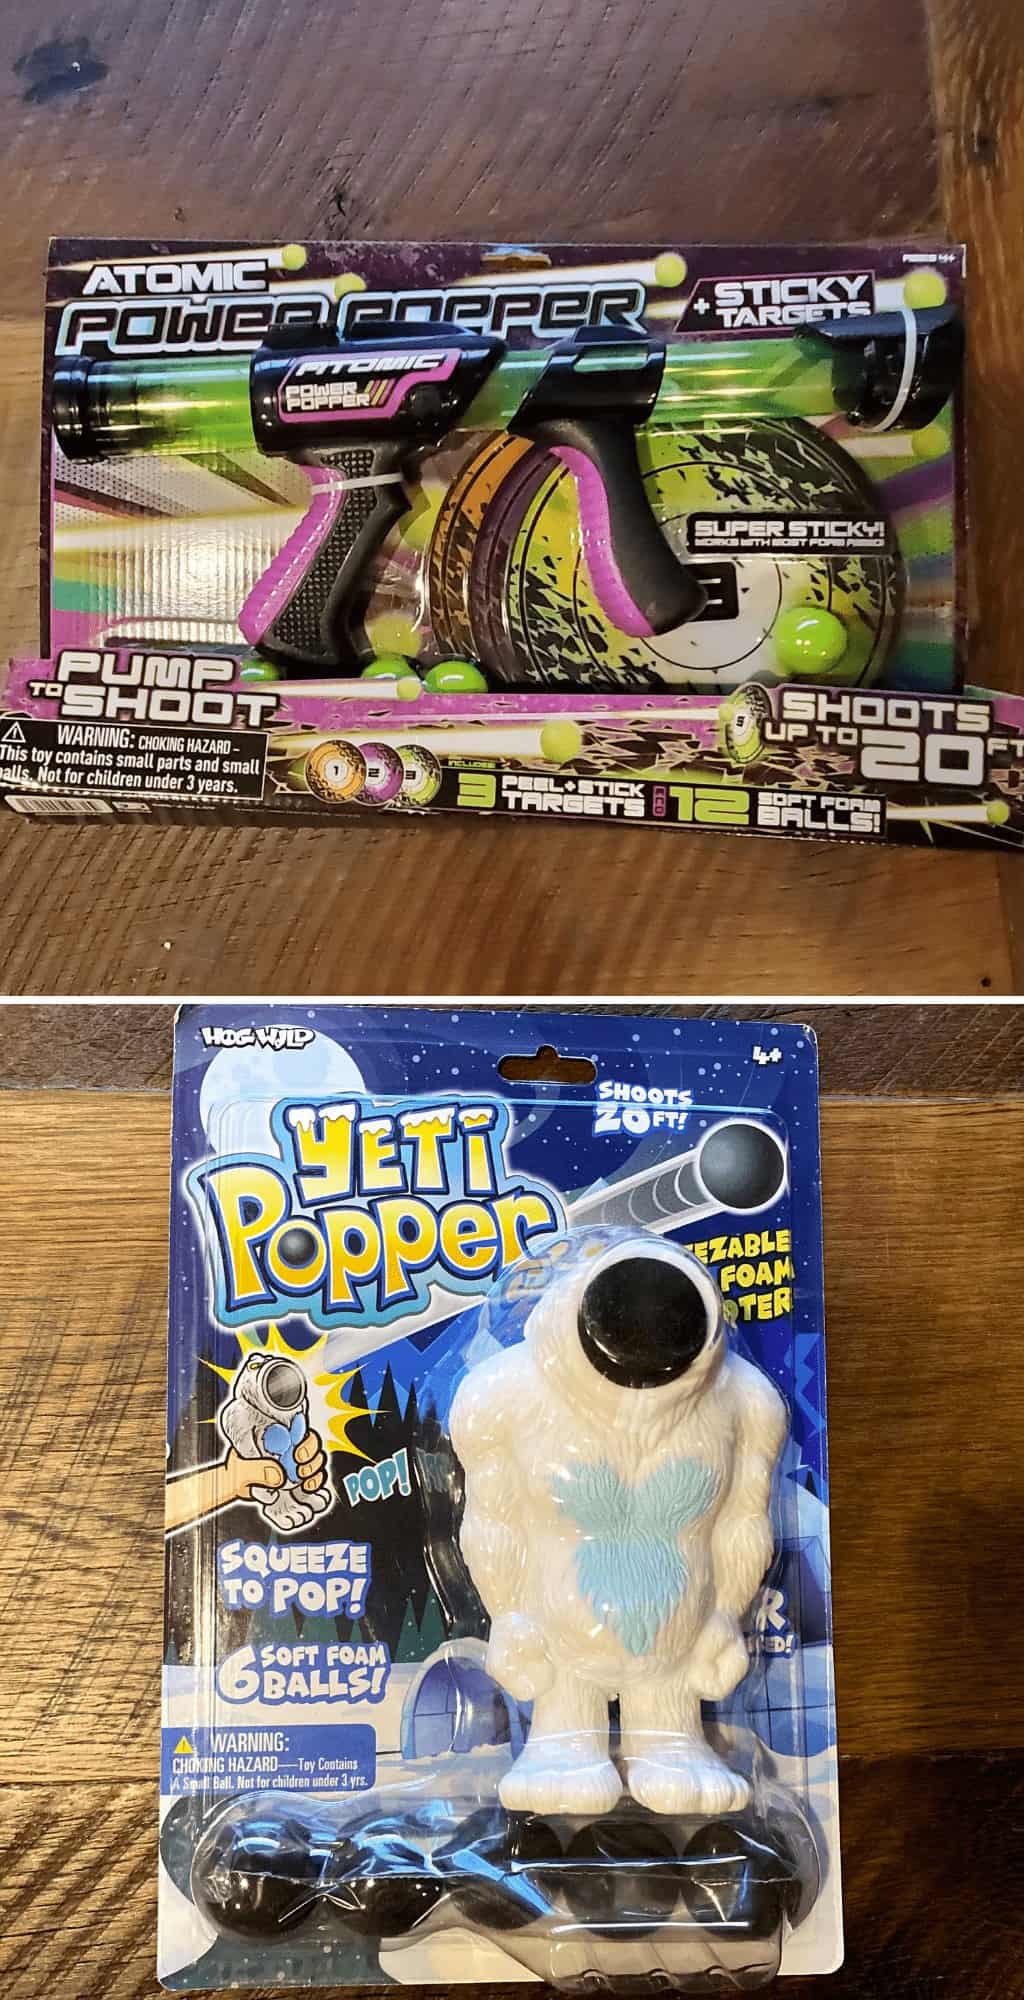  atomic power popper with sticky target